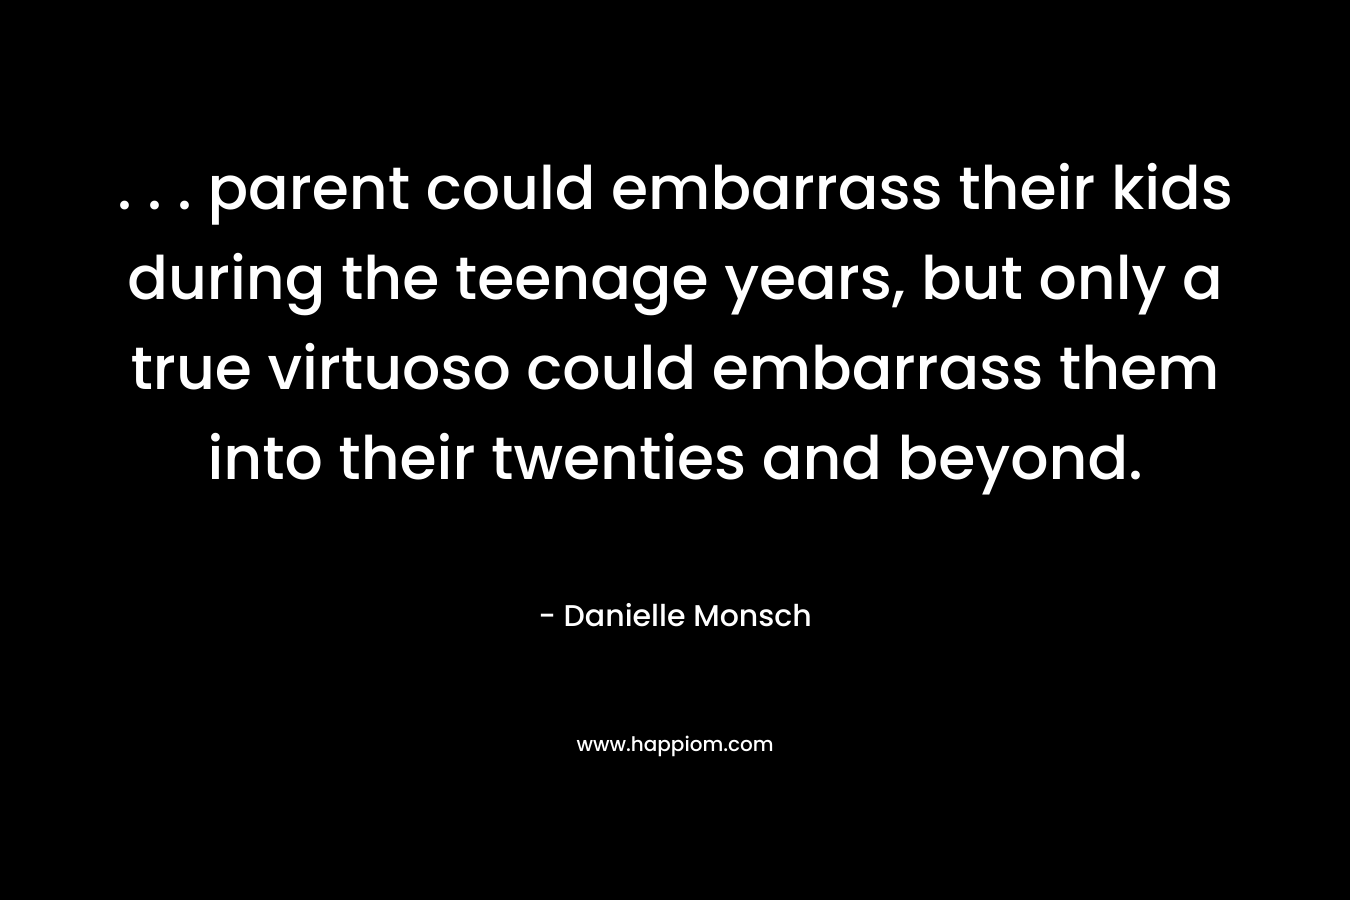 . . . parent could embarrass their kids during the teenage years, but only a true virtuoso could embarrass them into their twenties and beyond. – Danielle Monsch